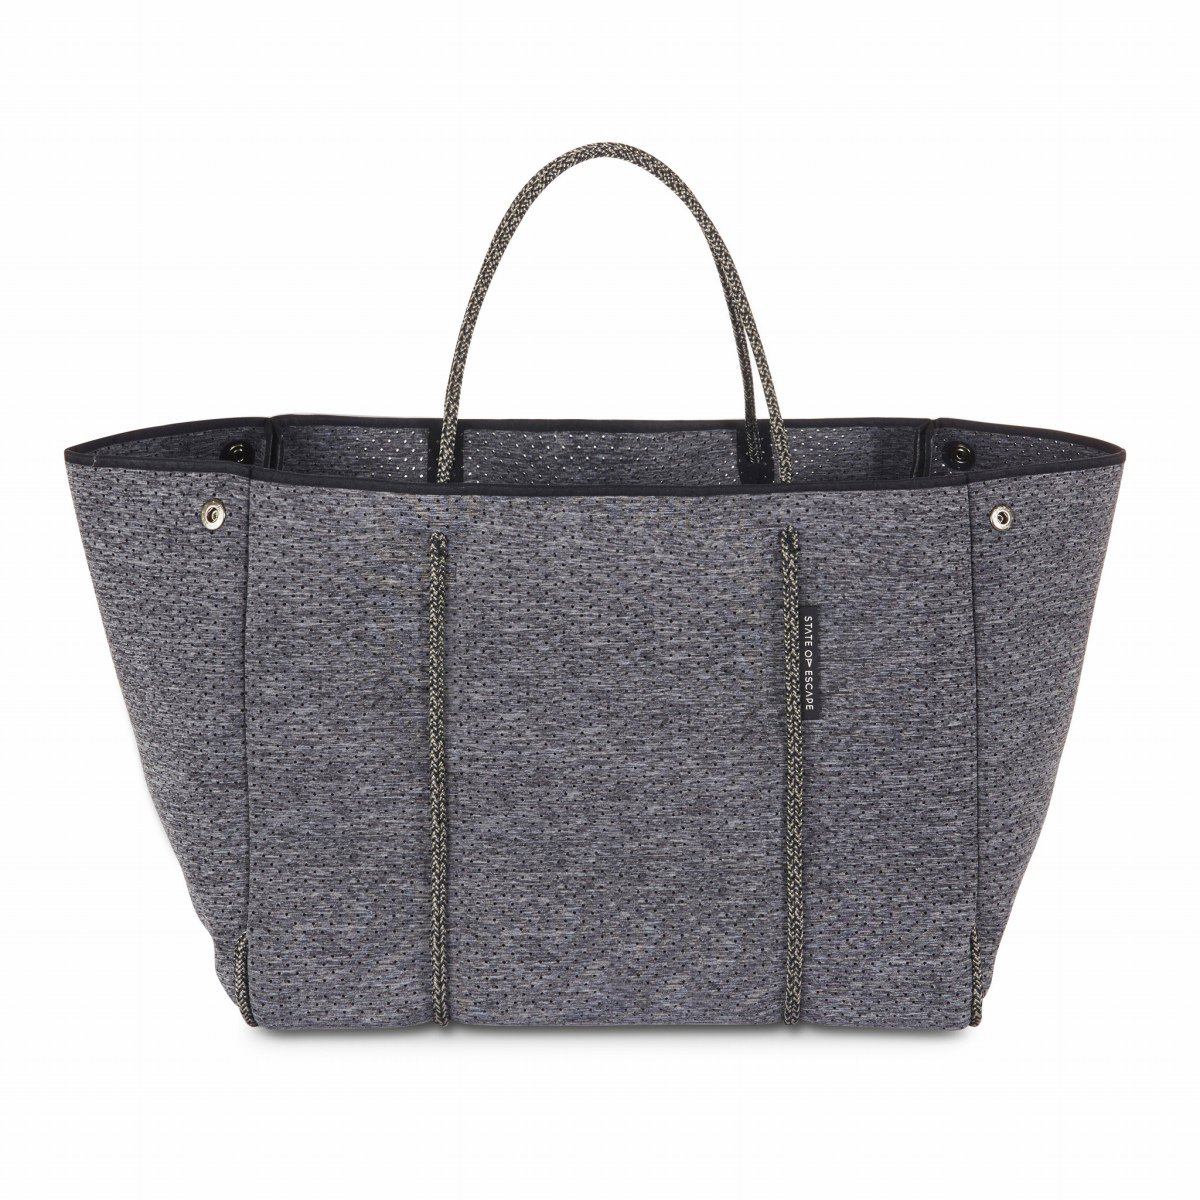 State of Escape(ステイトオブエスケープ)ESCAPE bag in LUXE charcoal